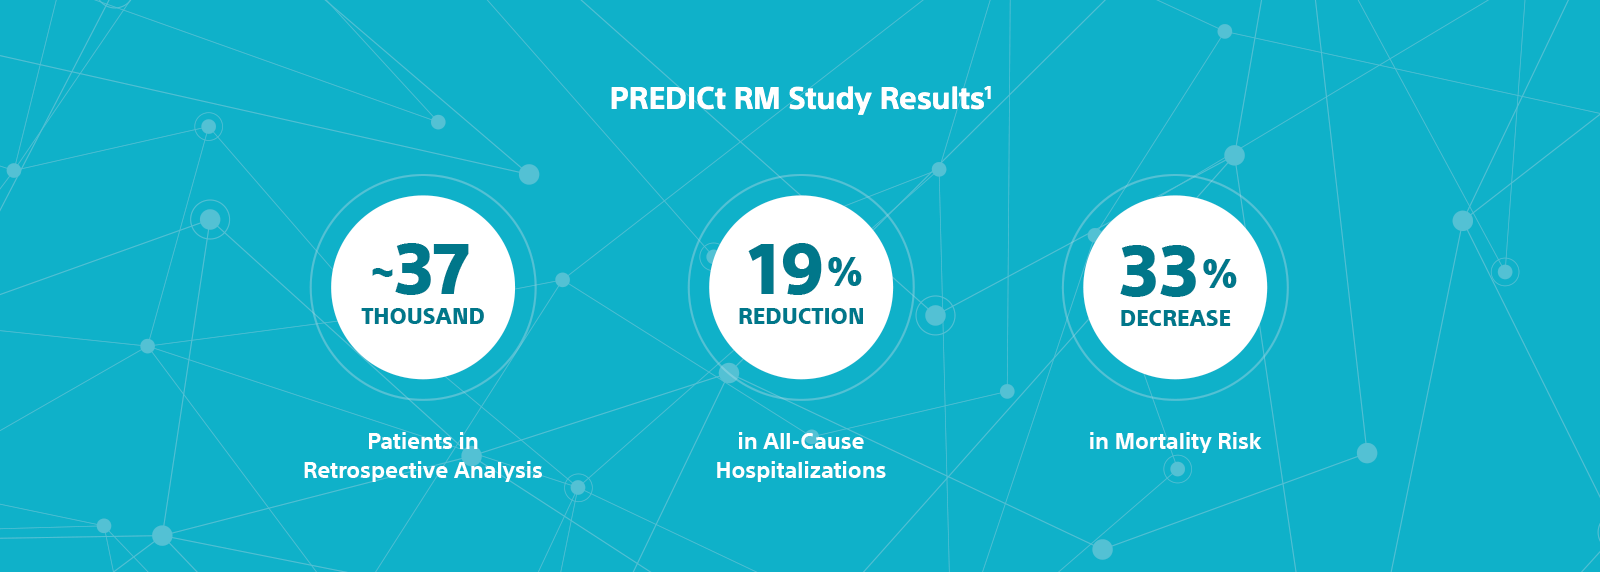 Graphics showing approximately 37,000 patients in retrospective analysis from the PREDICt RM Study, a 19% reduction in all-cause hospitalizations for remotely monitored patients, a 33% decrease in mortality risk for remotely monitored patients.